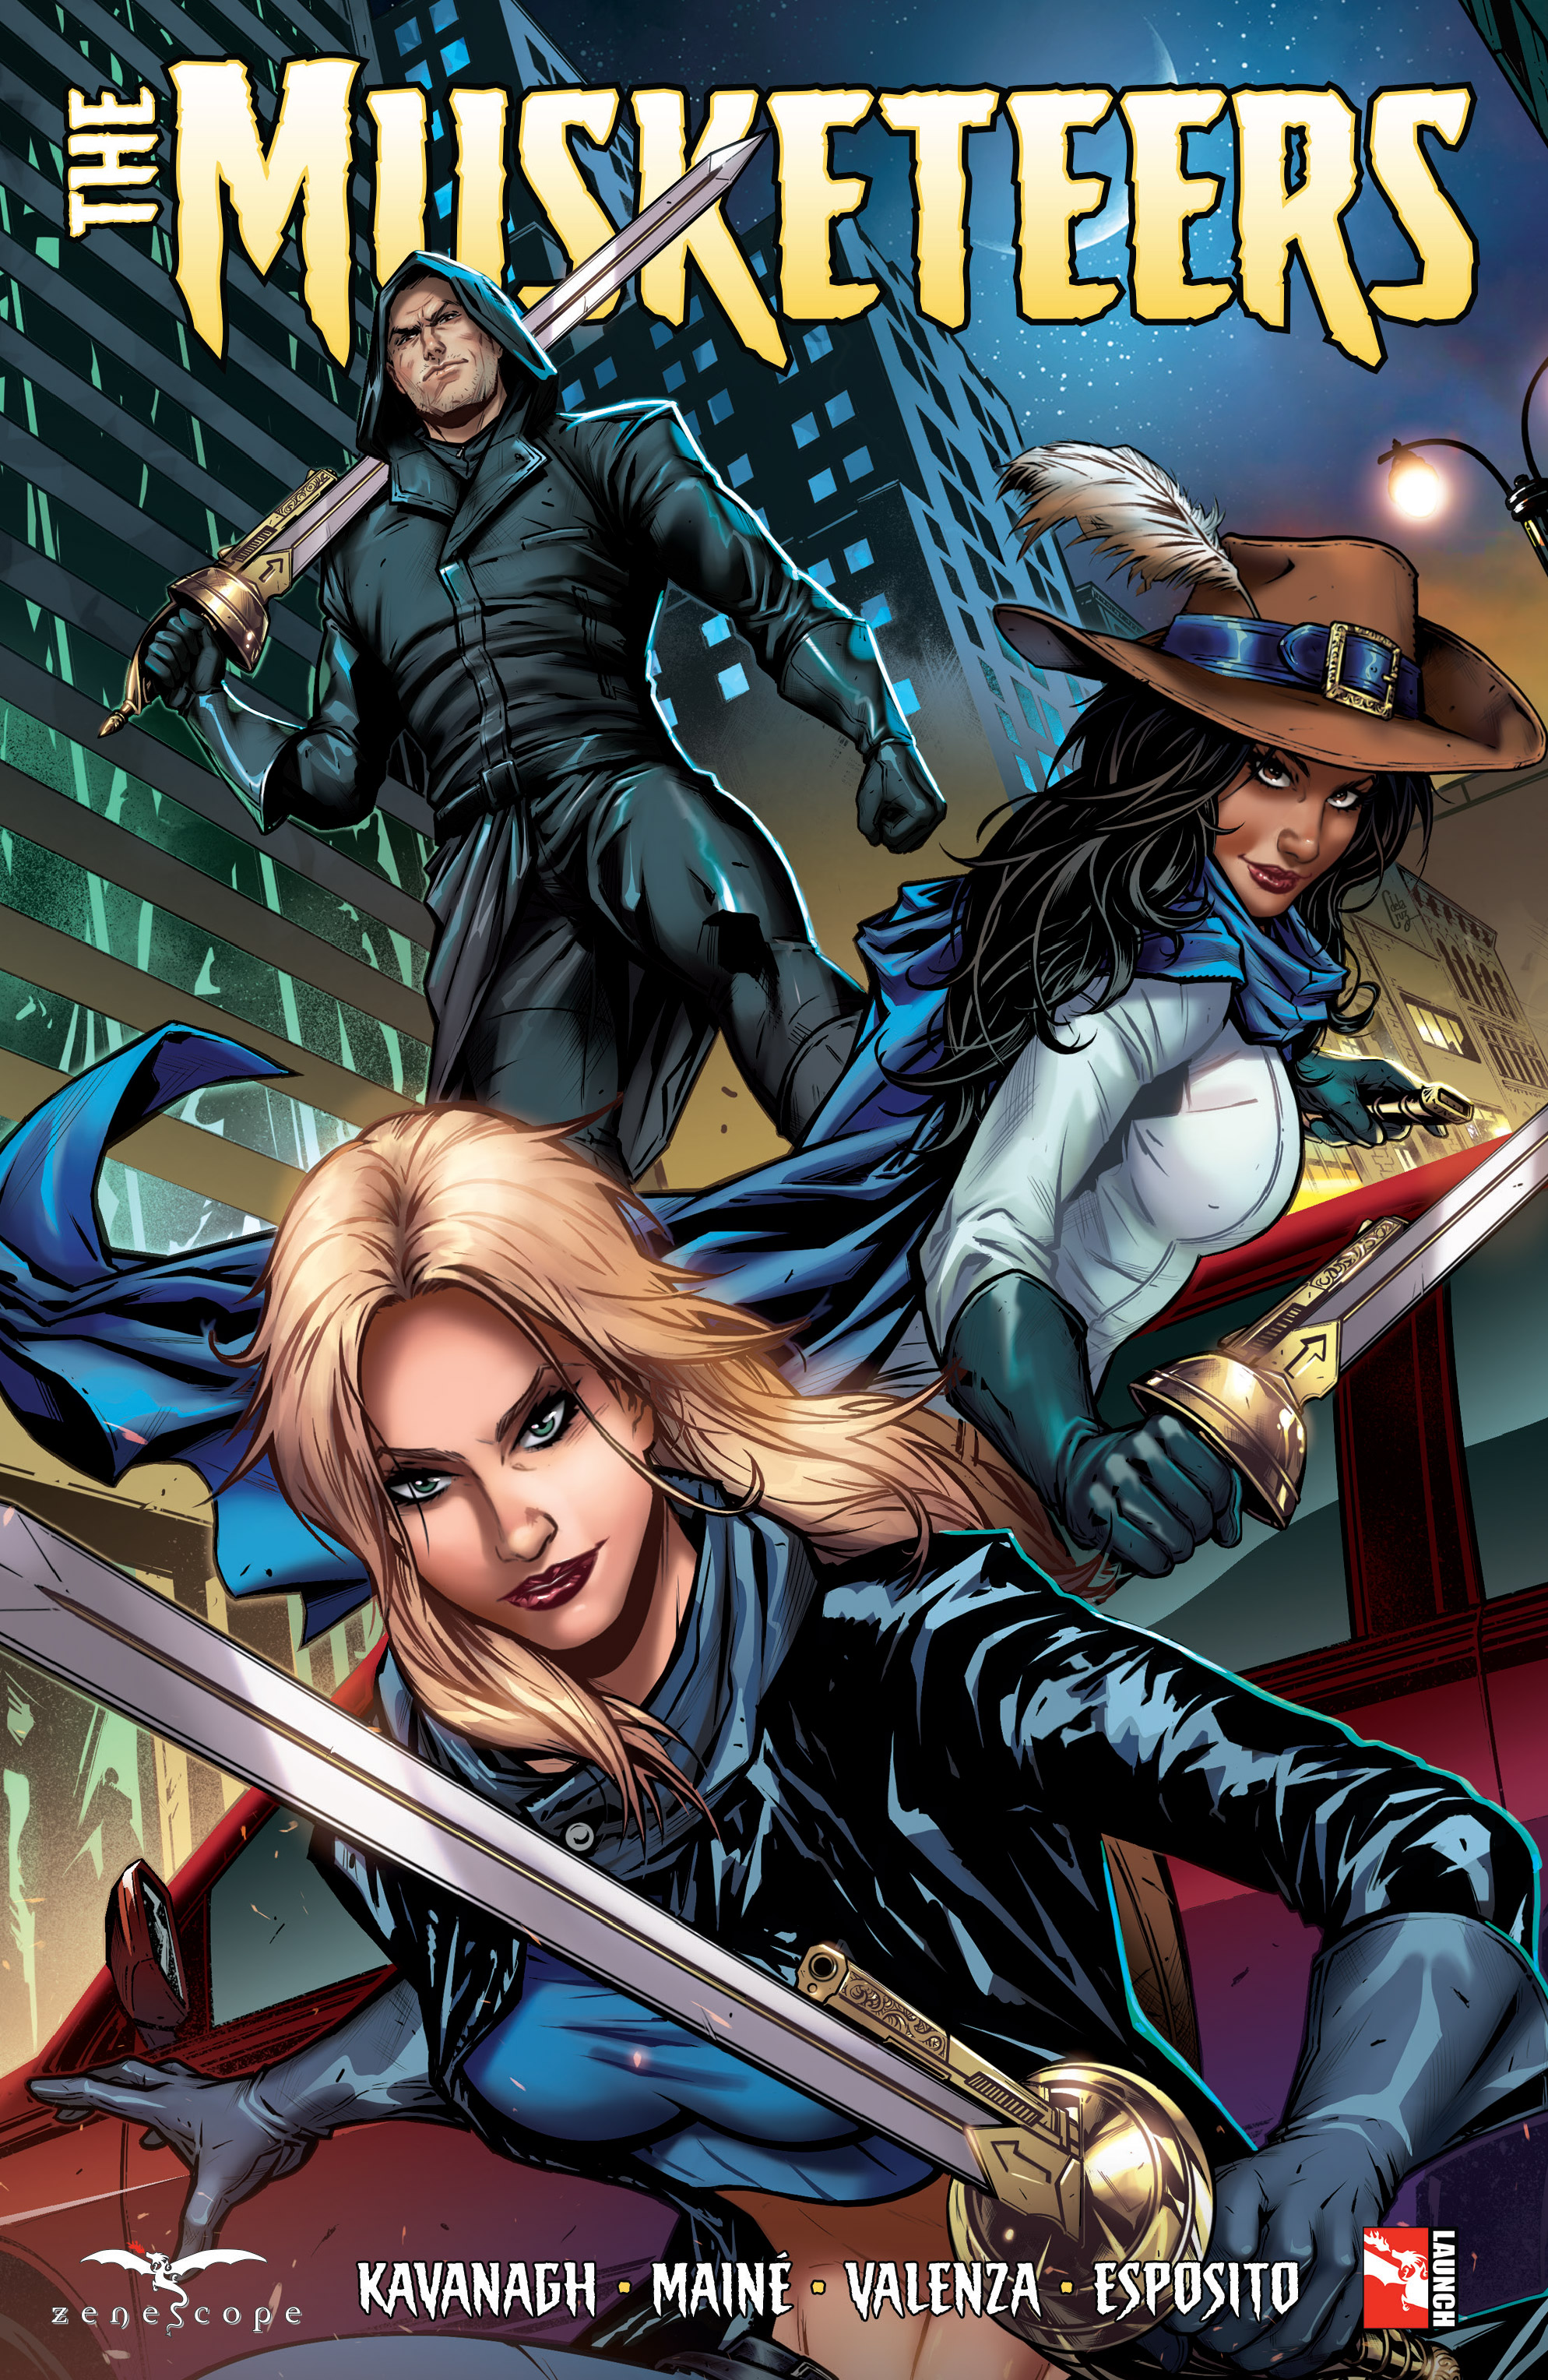 Read online The Musketeers comic -  Issue # _TPB - 1